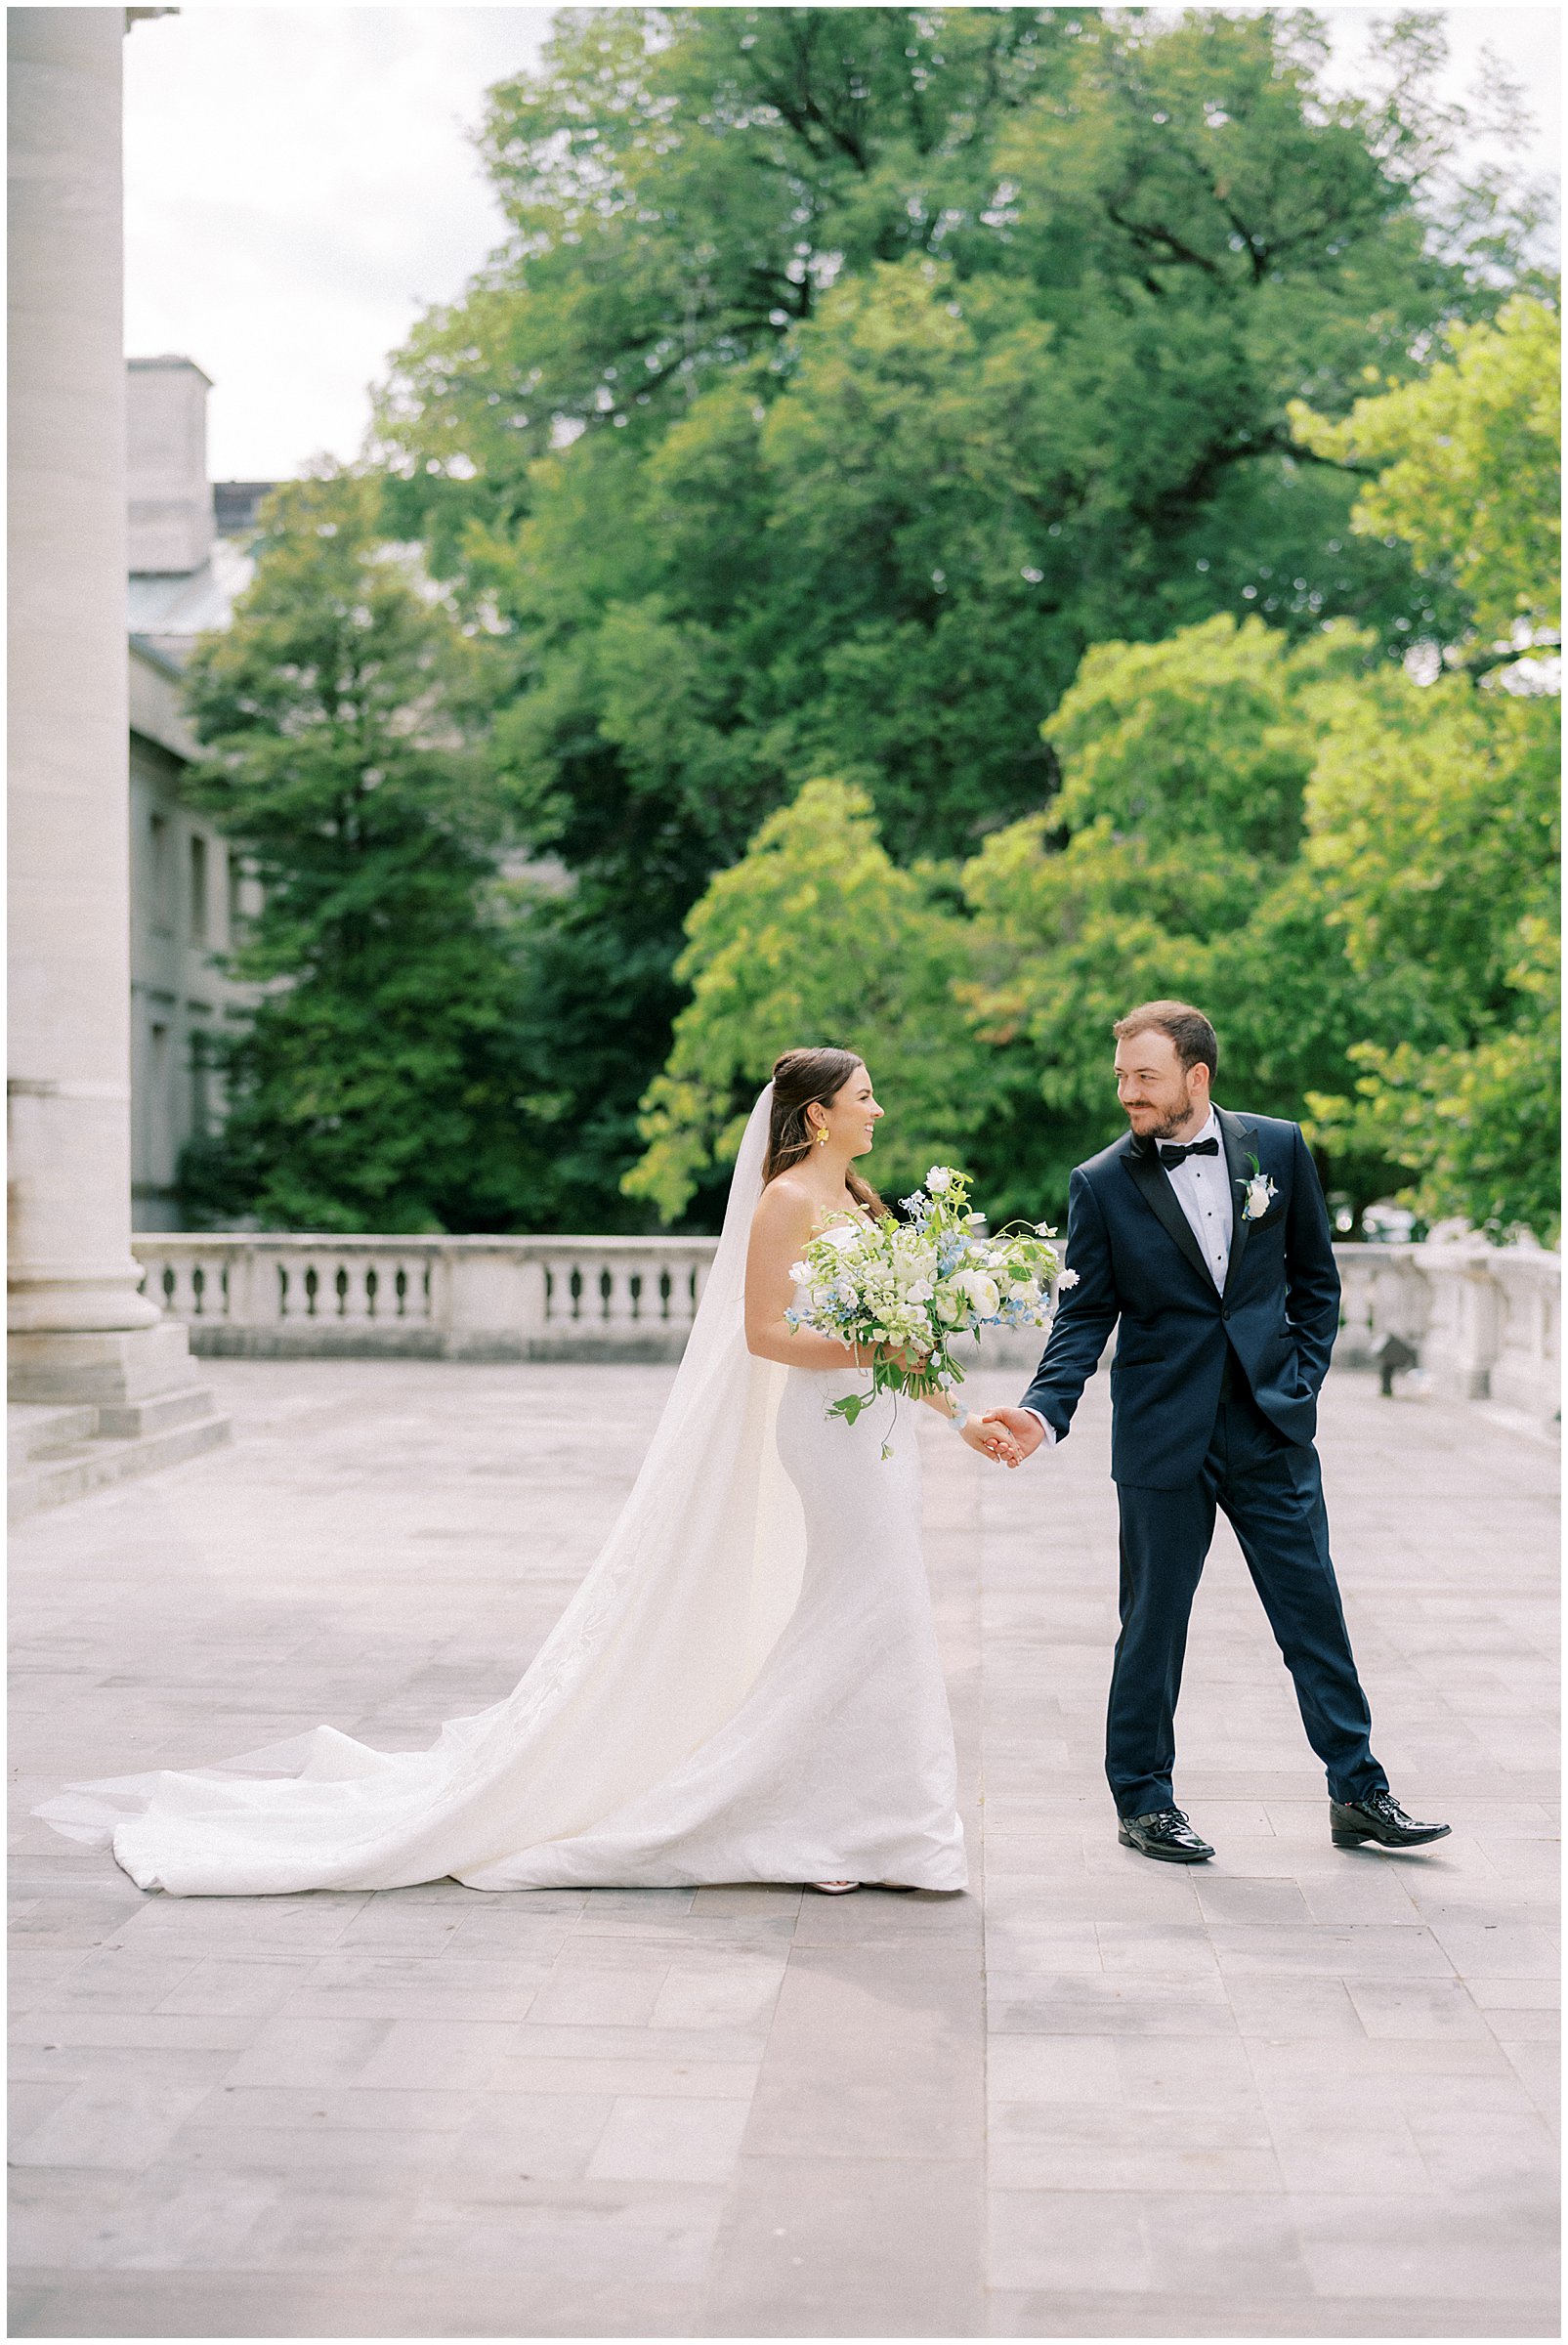 Bride and groom portraits at DAR Constitution Hall in Washington, DC